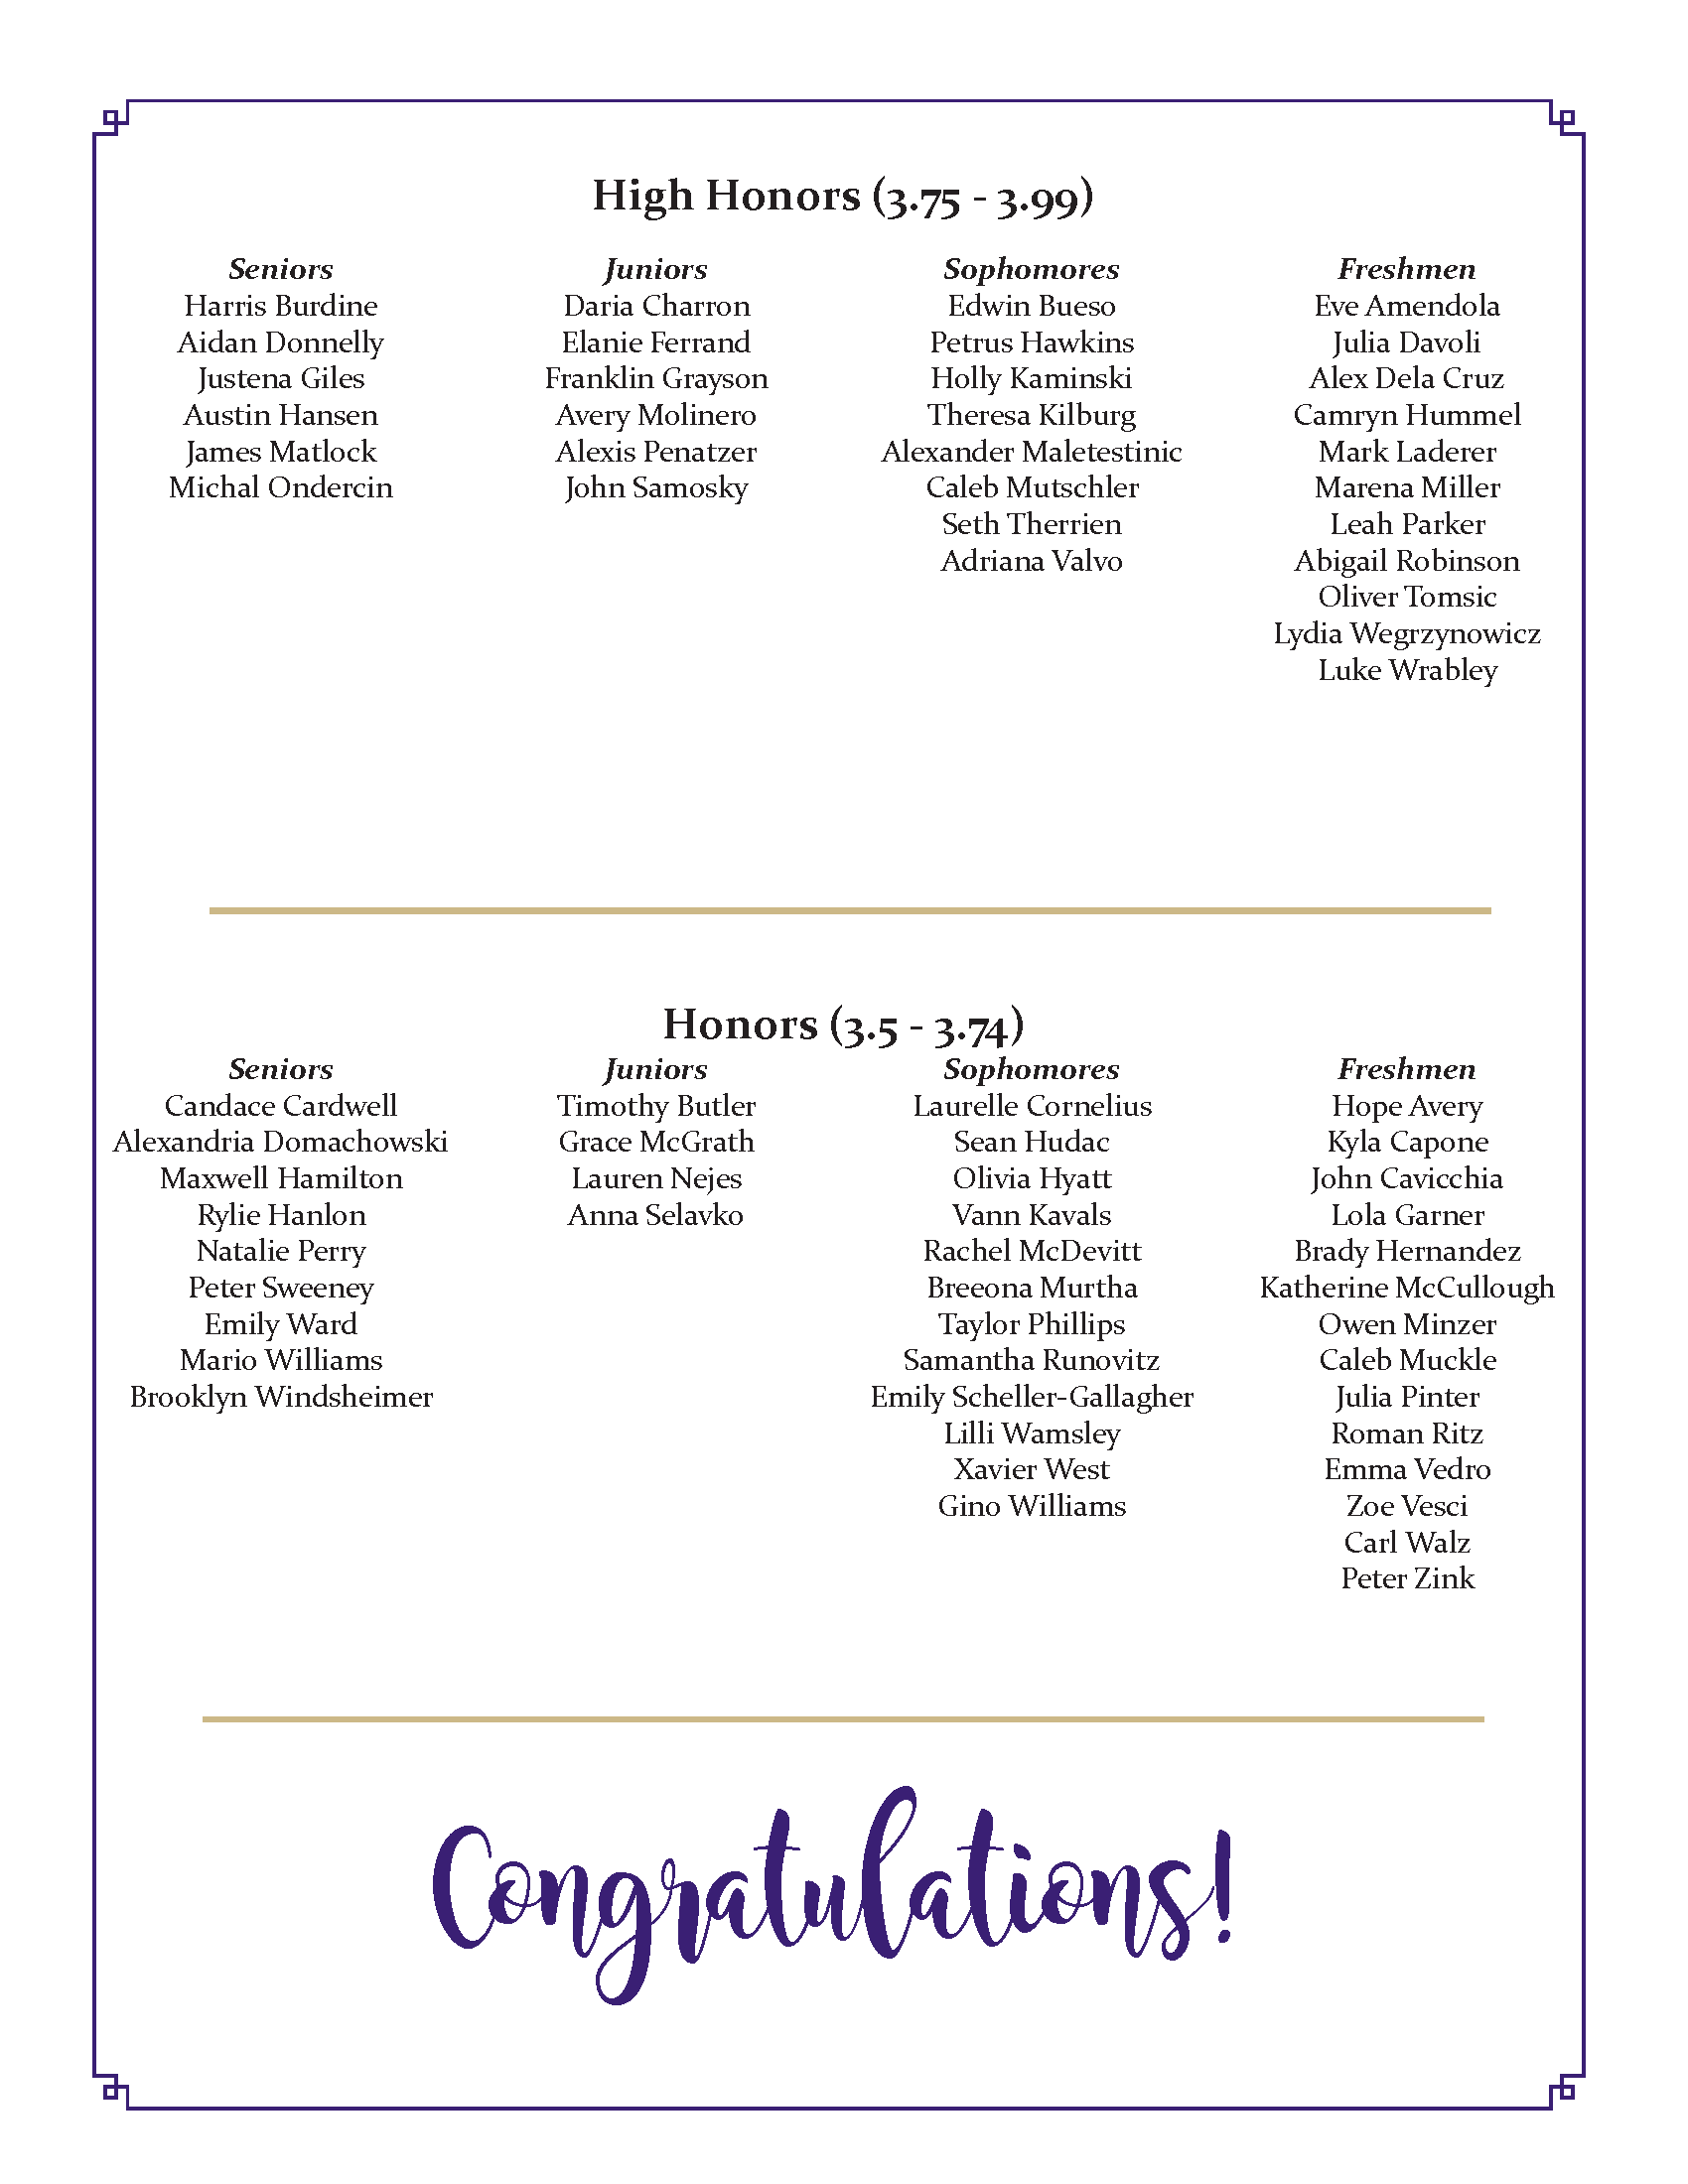 olsh honor roll graphic page 2